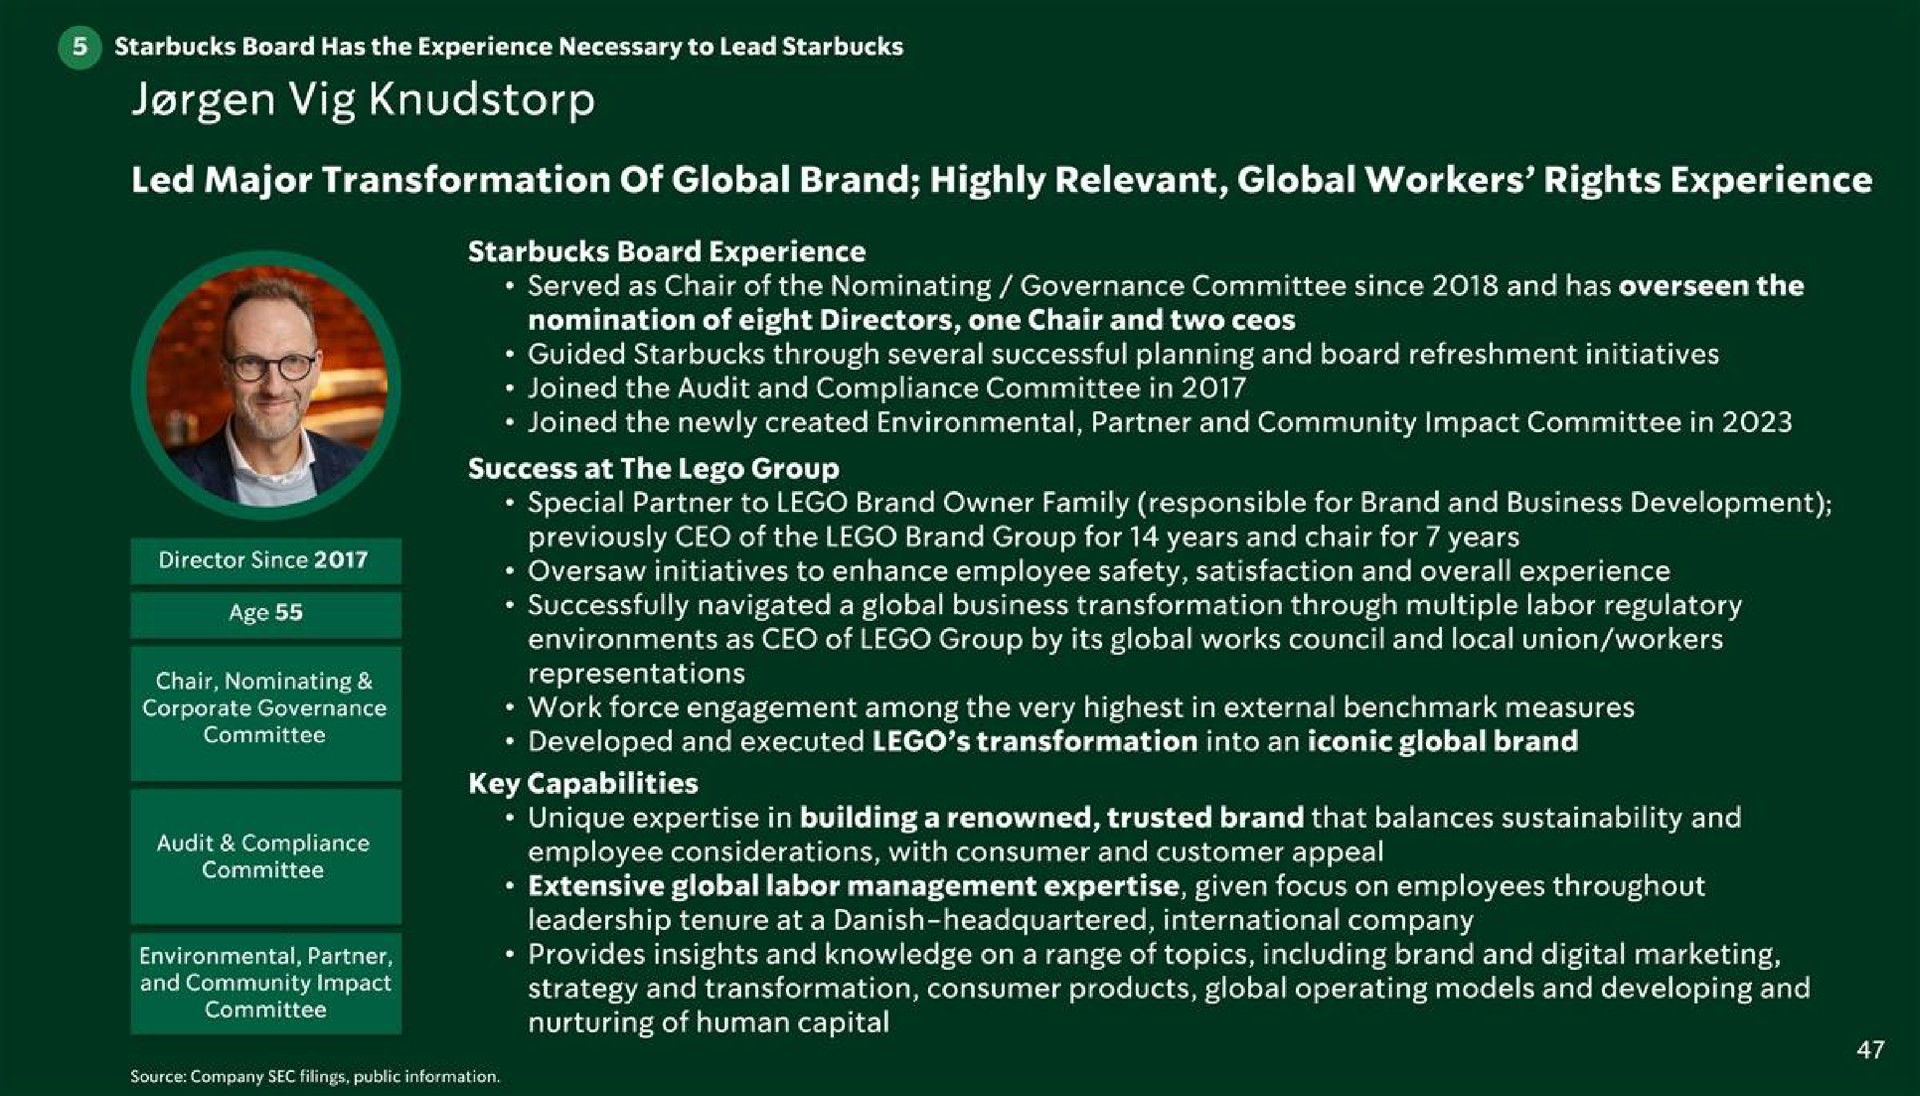 led major transformation of global brand highly relevant global workers rights experience | Starbucks